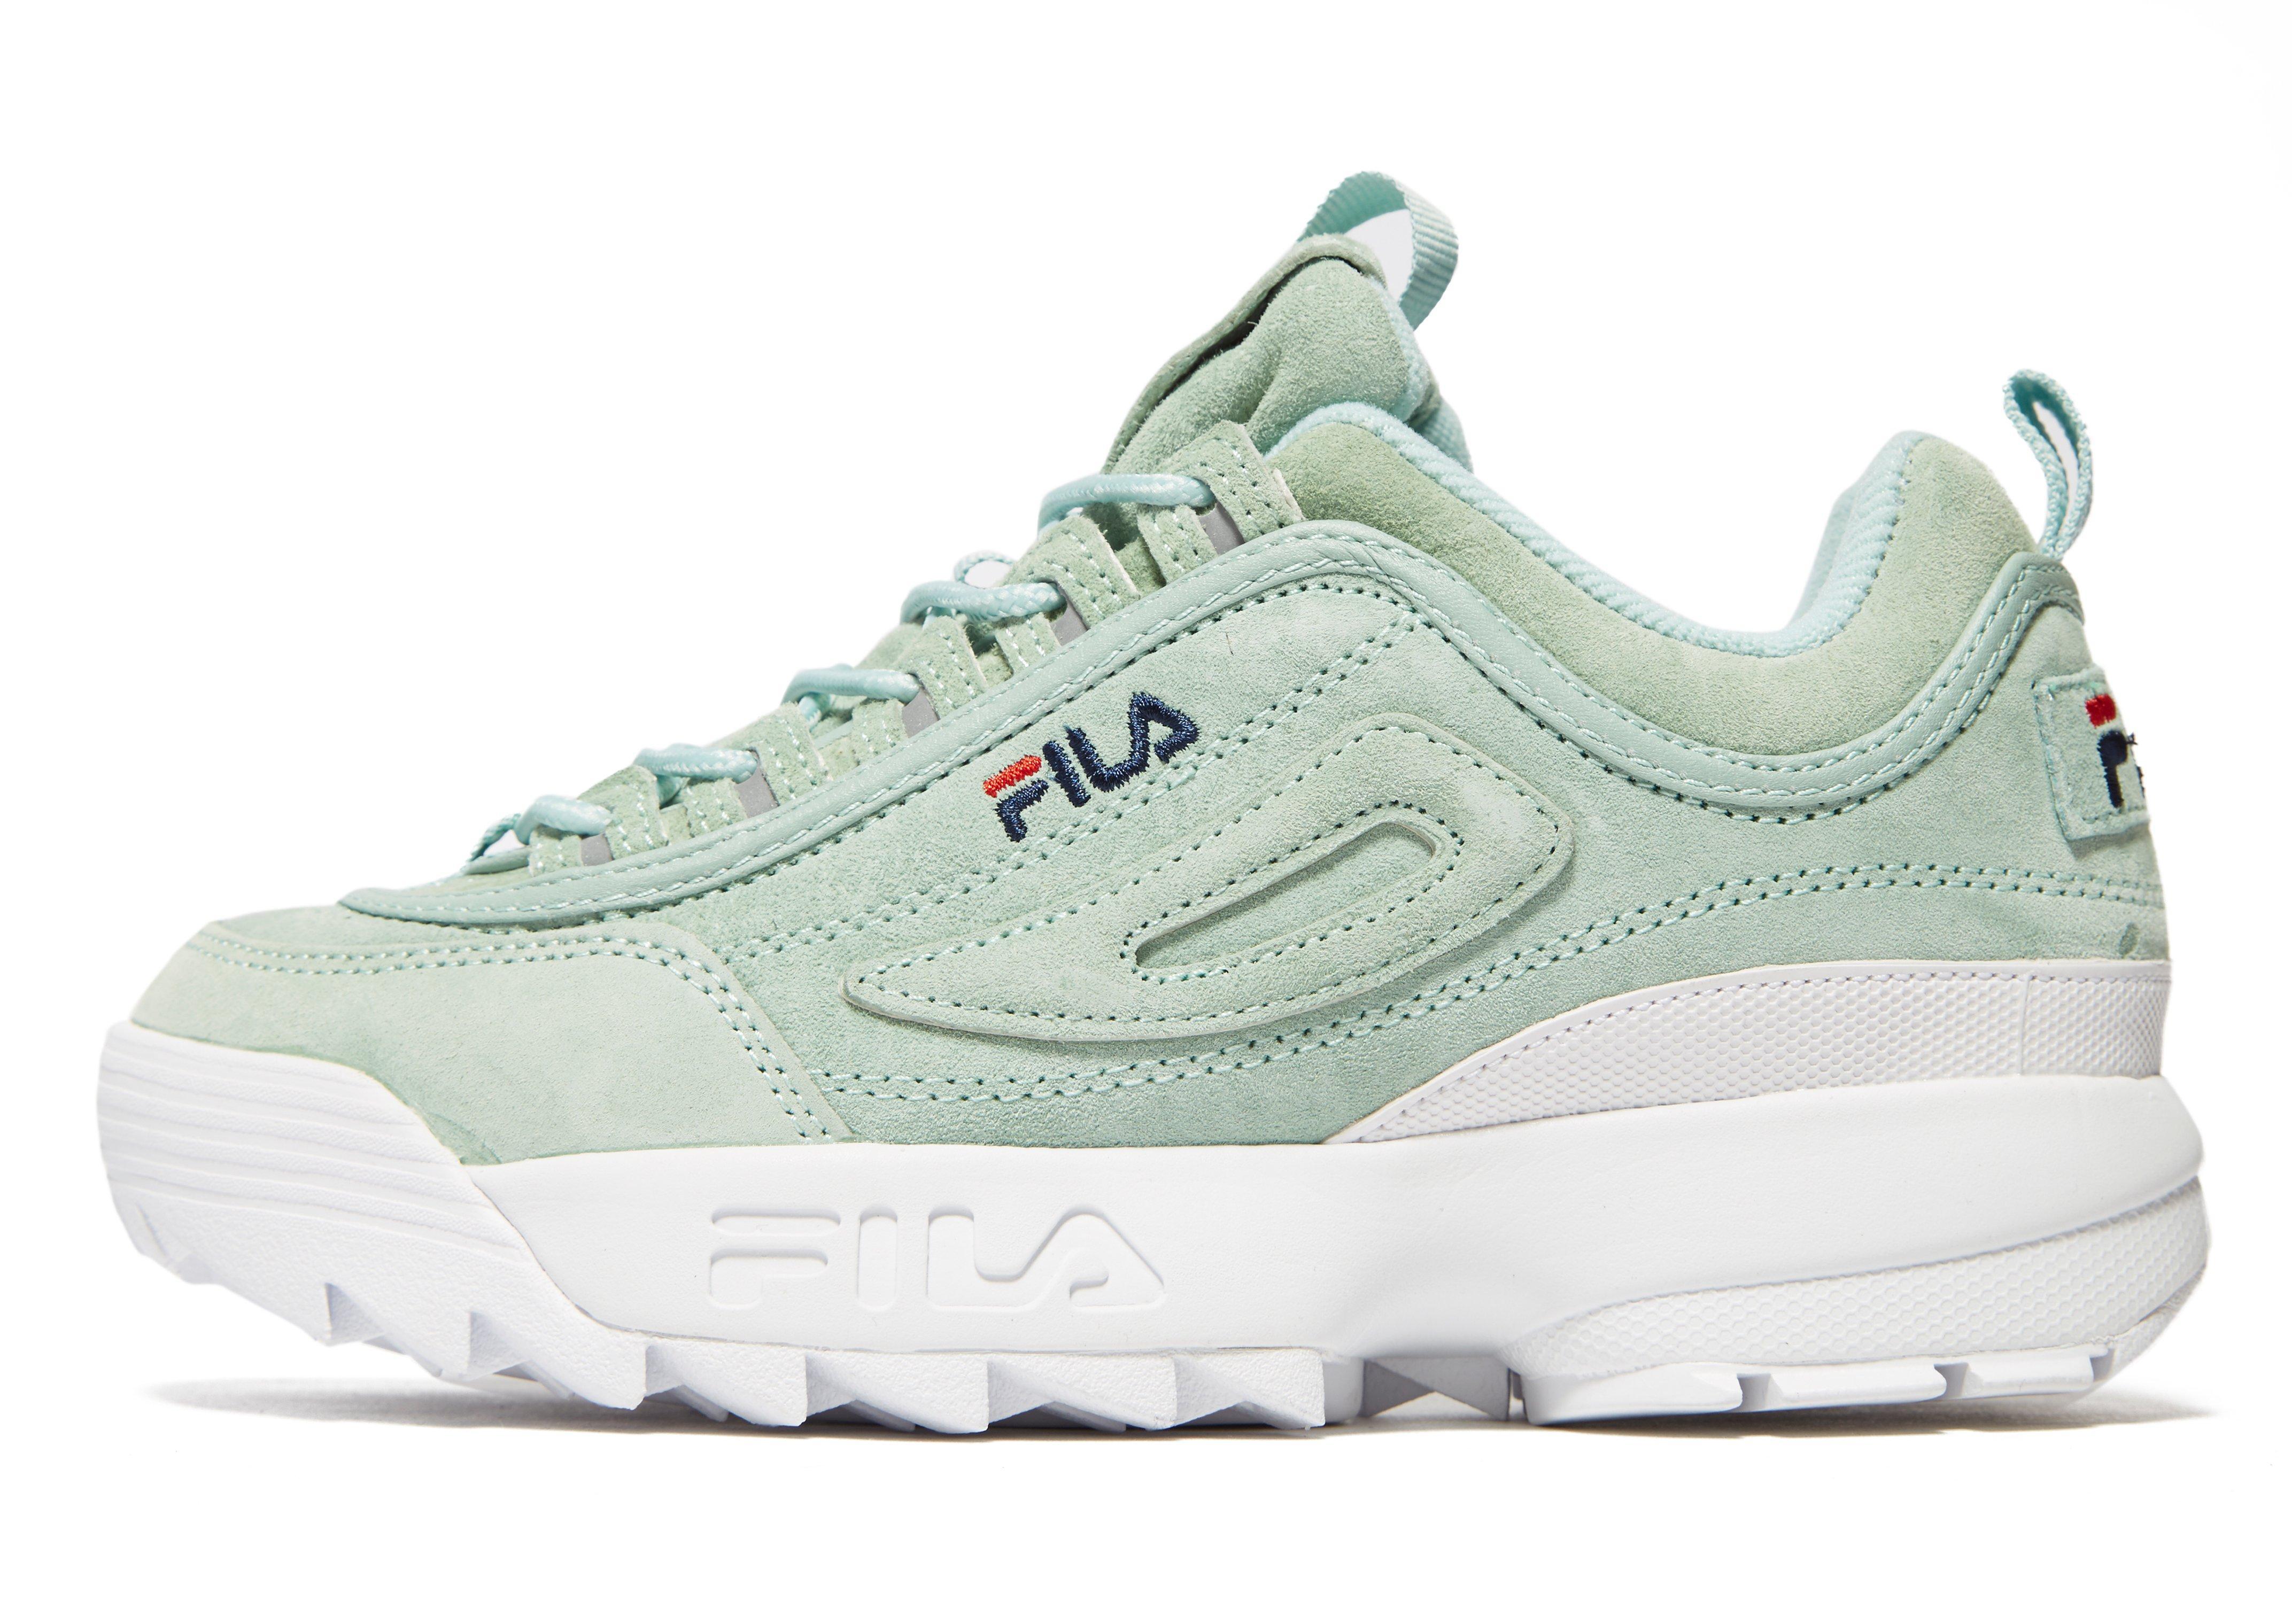 green suede fila,welcome to buy,ulliyeriscb.com